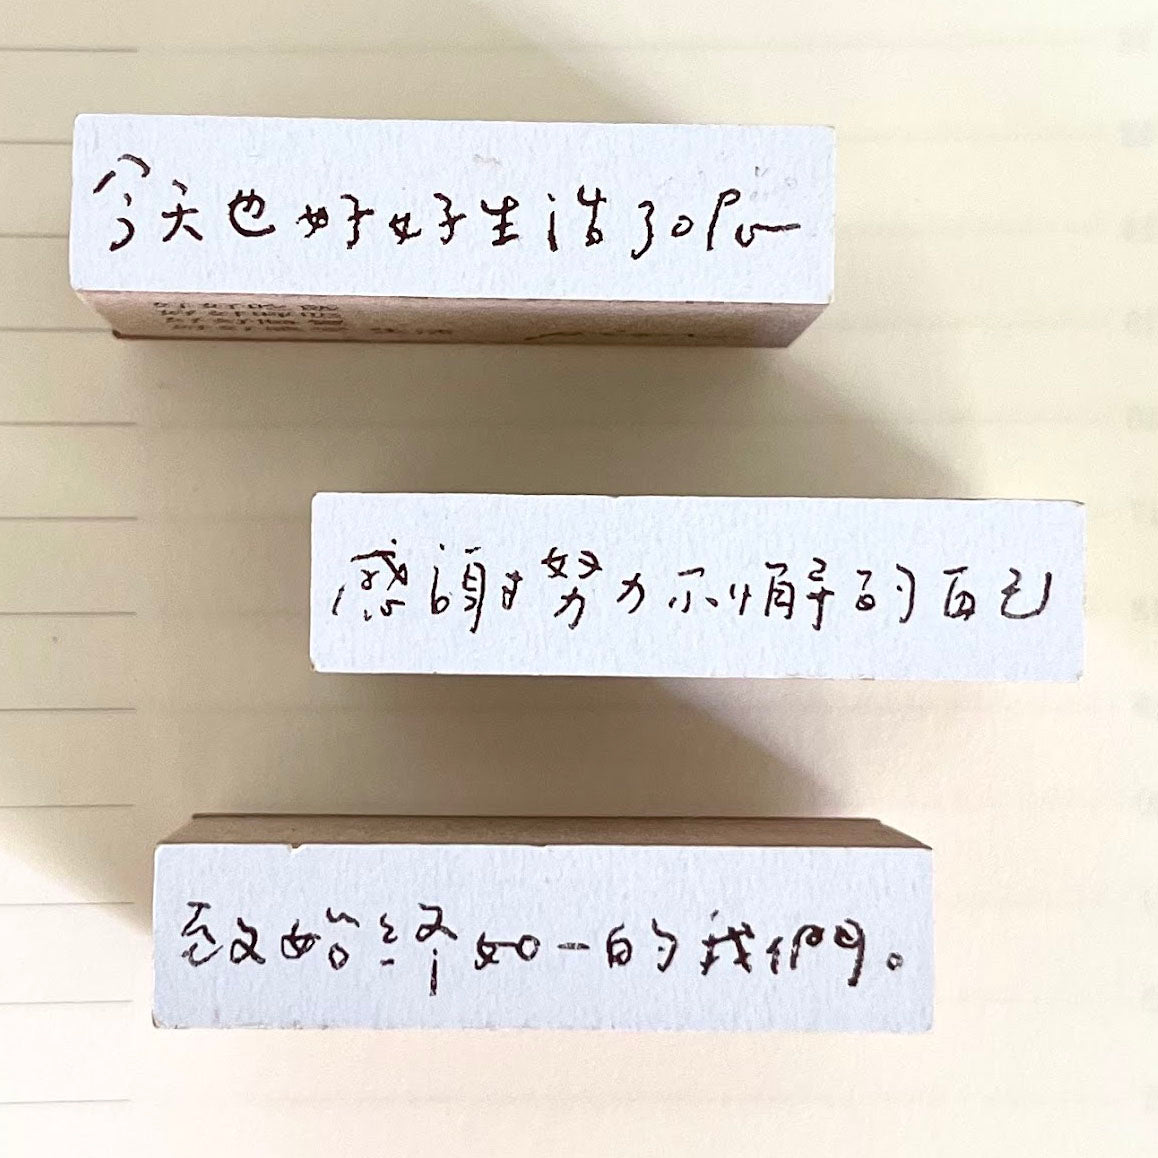 Pion Rubber Stamp 今天也好好生活了呢 (Live well today) 感謝努力不懈的自己 (Thanks myself who made the effort) 致始終如一的我們 (To us that being us)